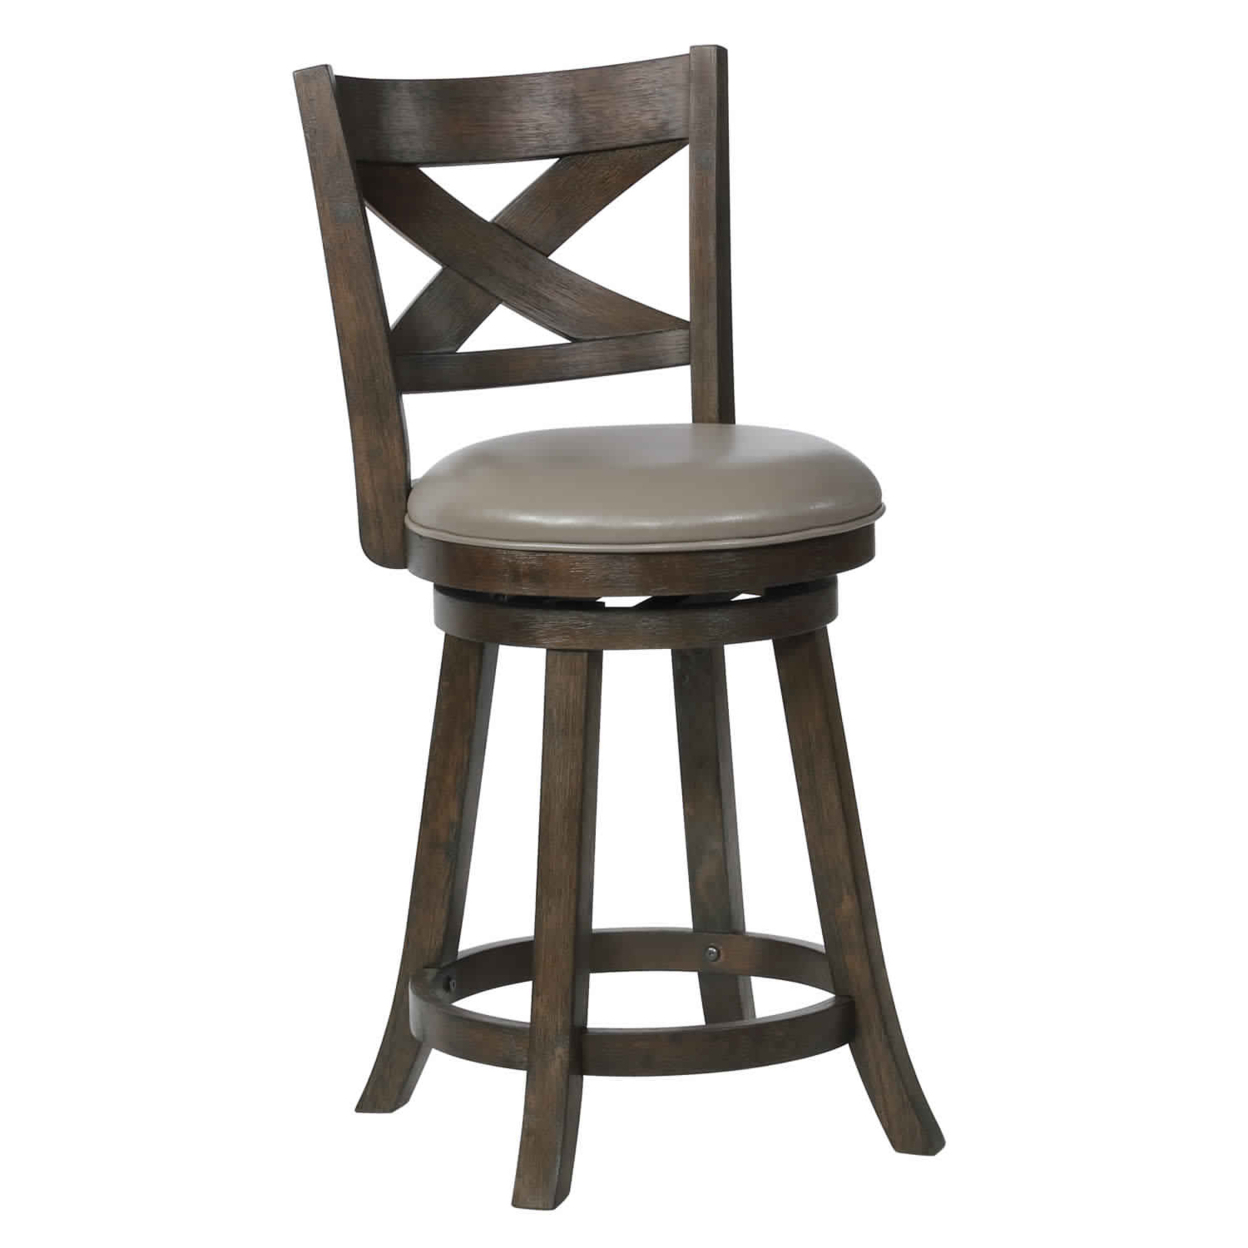 Curved Back Swivel Pub Stool With Leatherette Seat,Set Of 2, Gray And Brown- Saltoro Sherpi